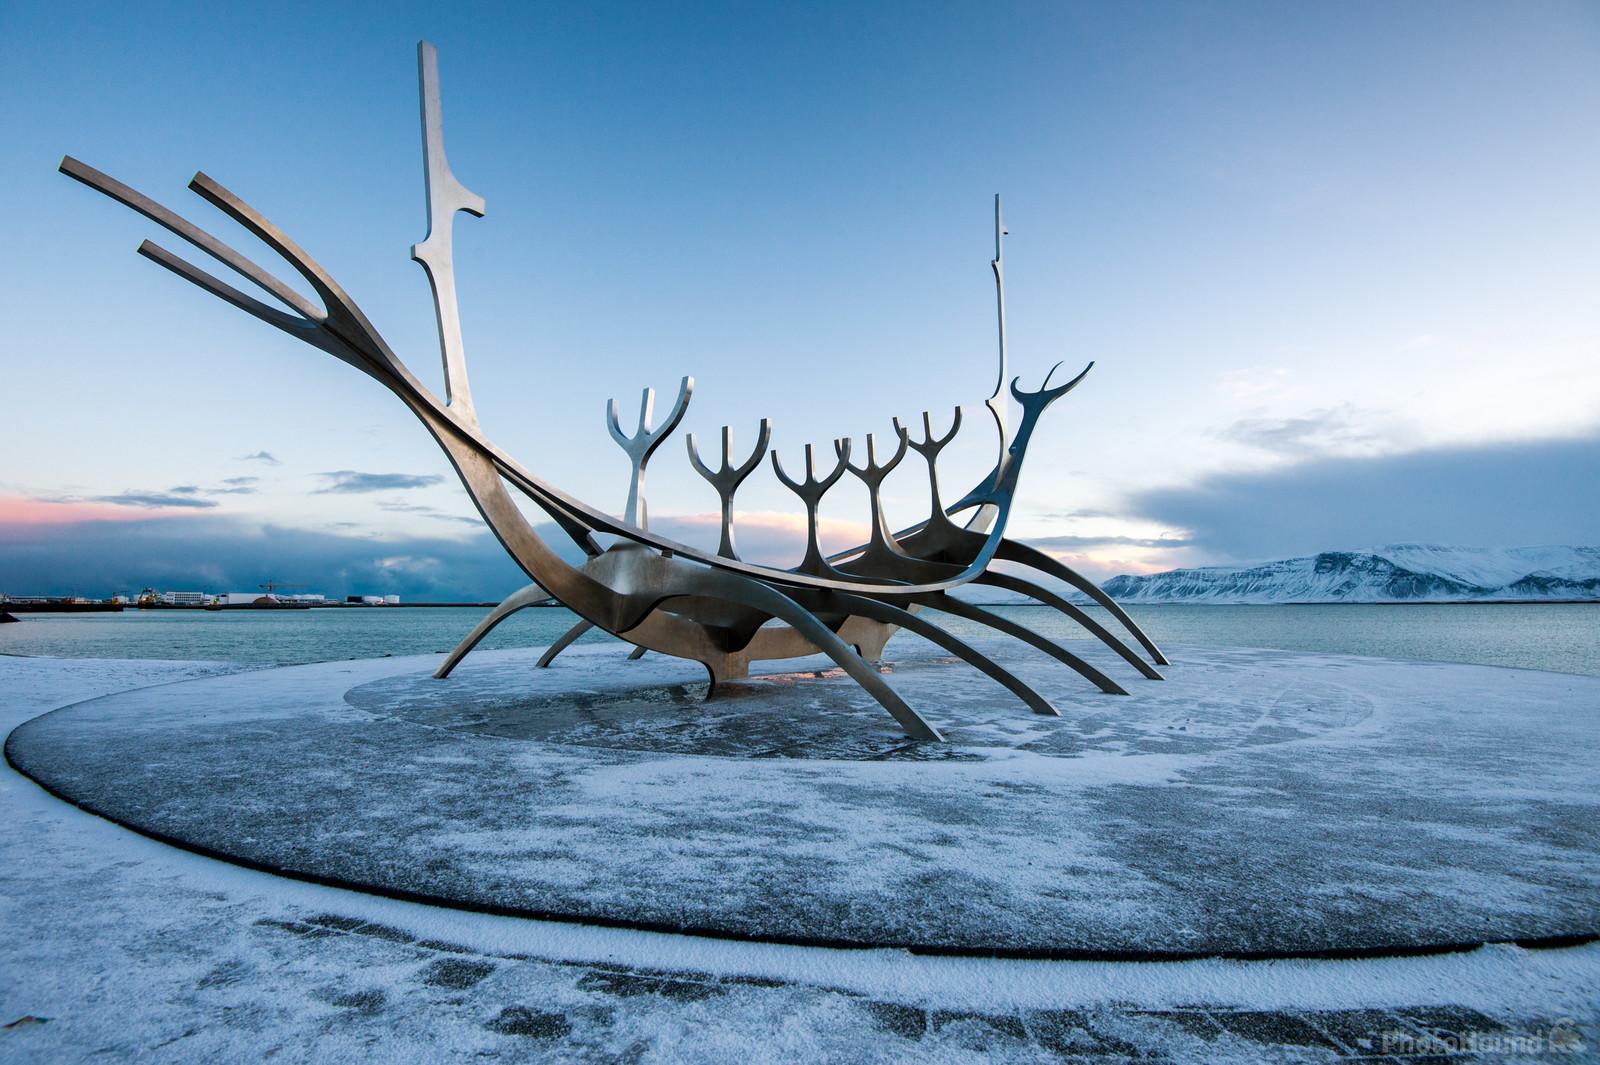 Image of Sun voyager by Richard Lizzimore